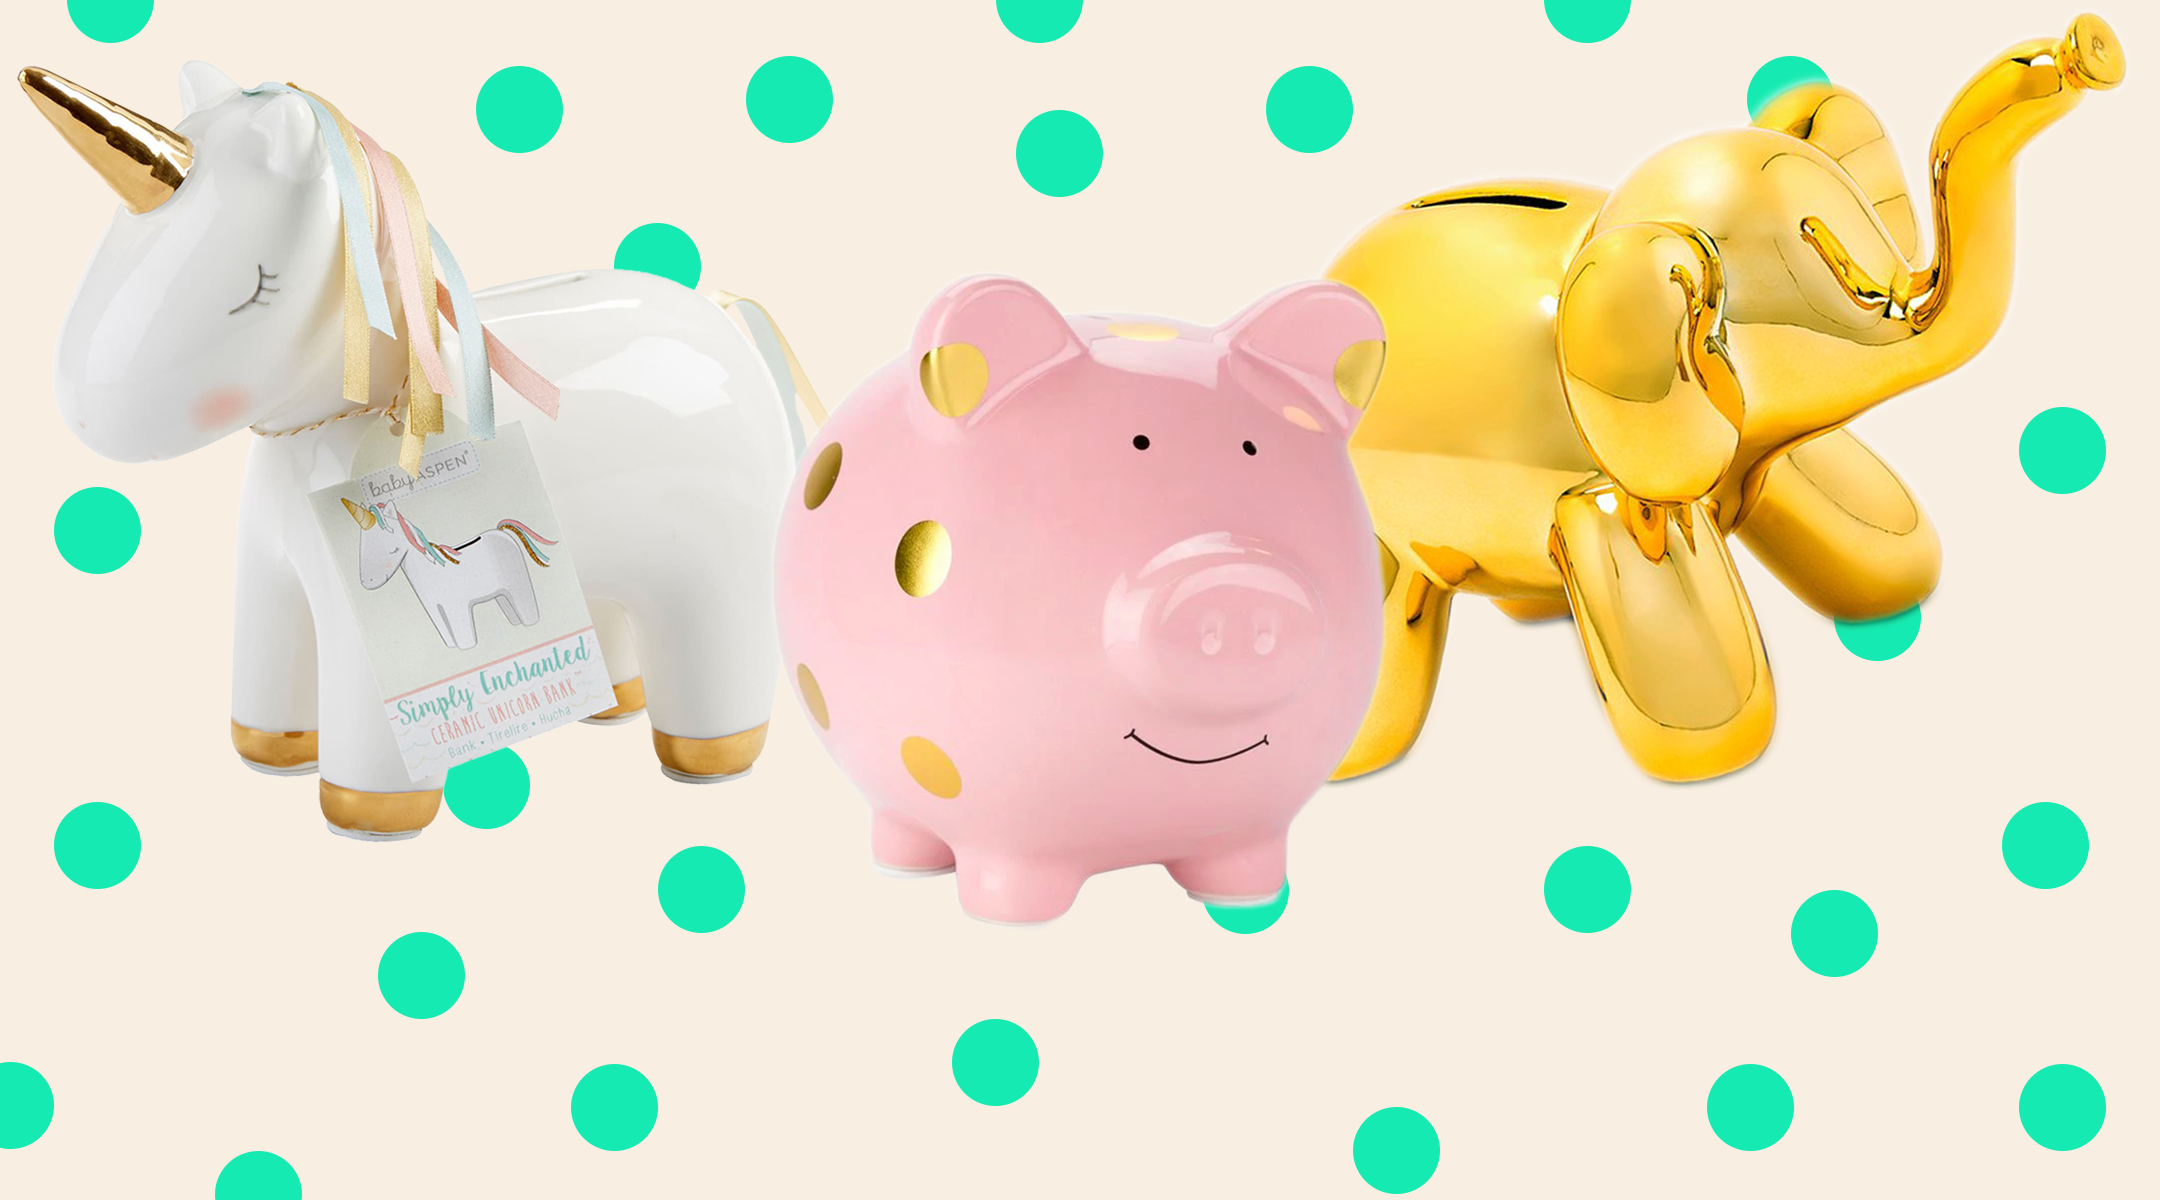 personalized piggy banks for kids